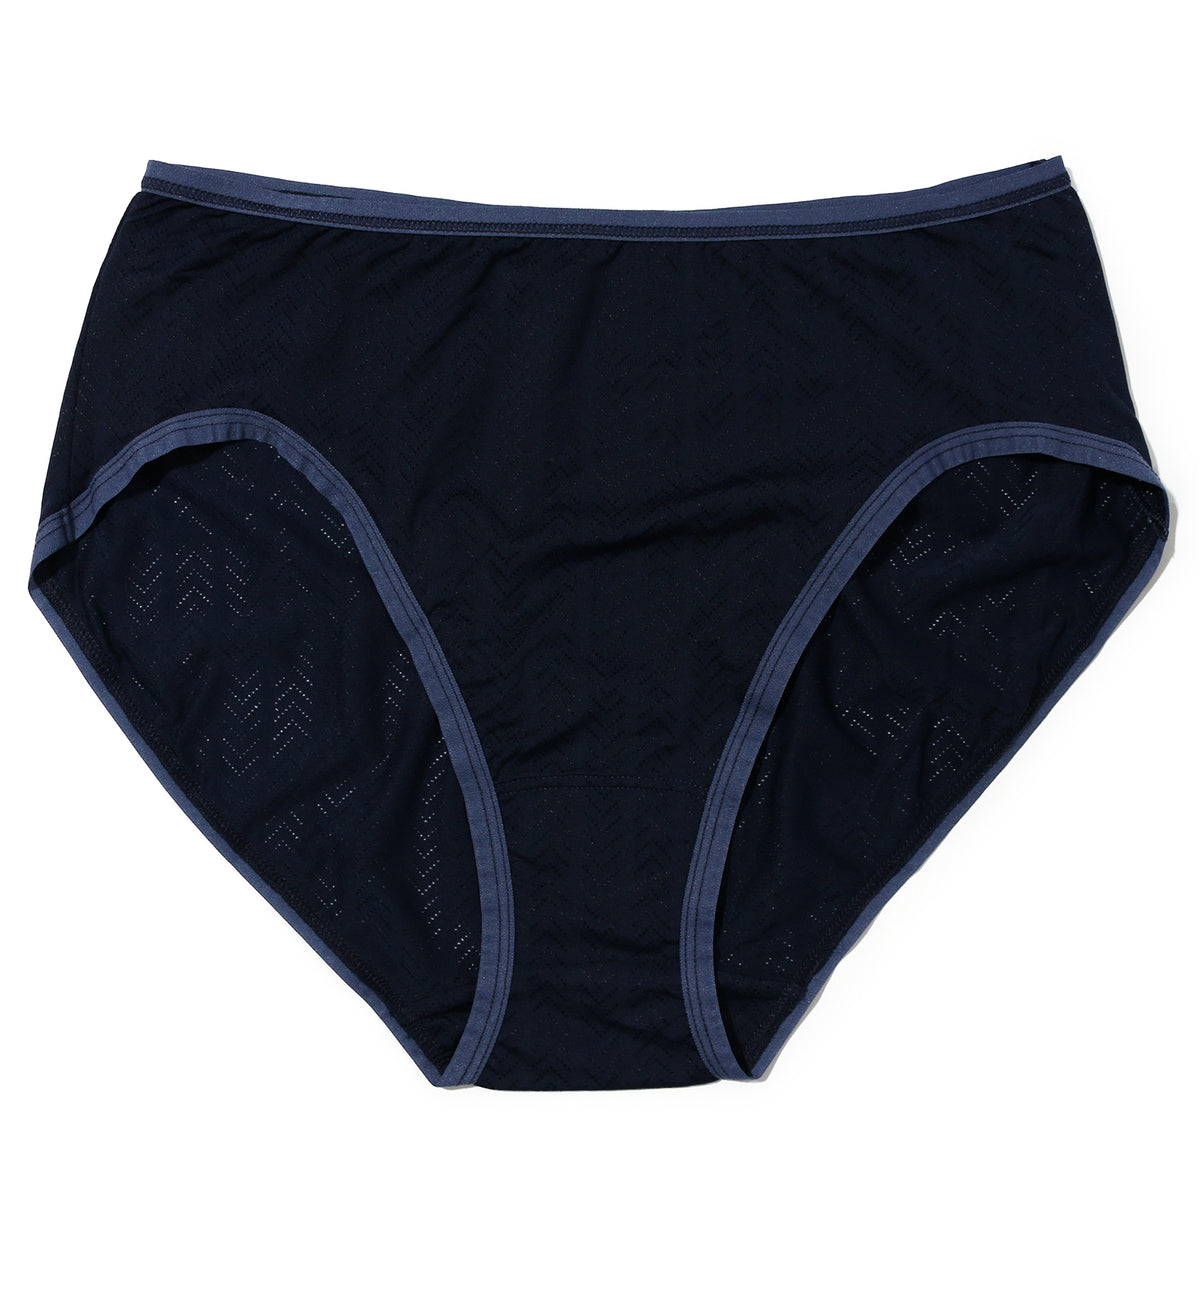 Hanky Panky MoveCalm High Waisted Brief (2P2264),XS,Blackberry Crumble/Waterfall Blue - Blackberry Crumble/Waterfall Blue,XS